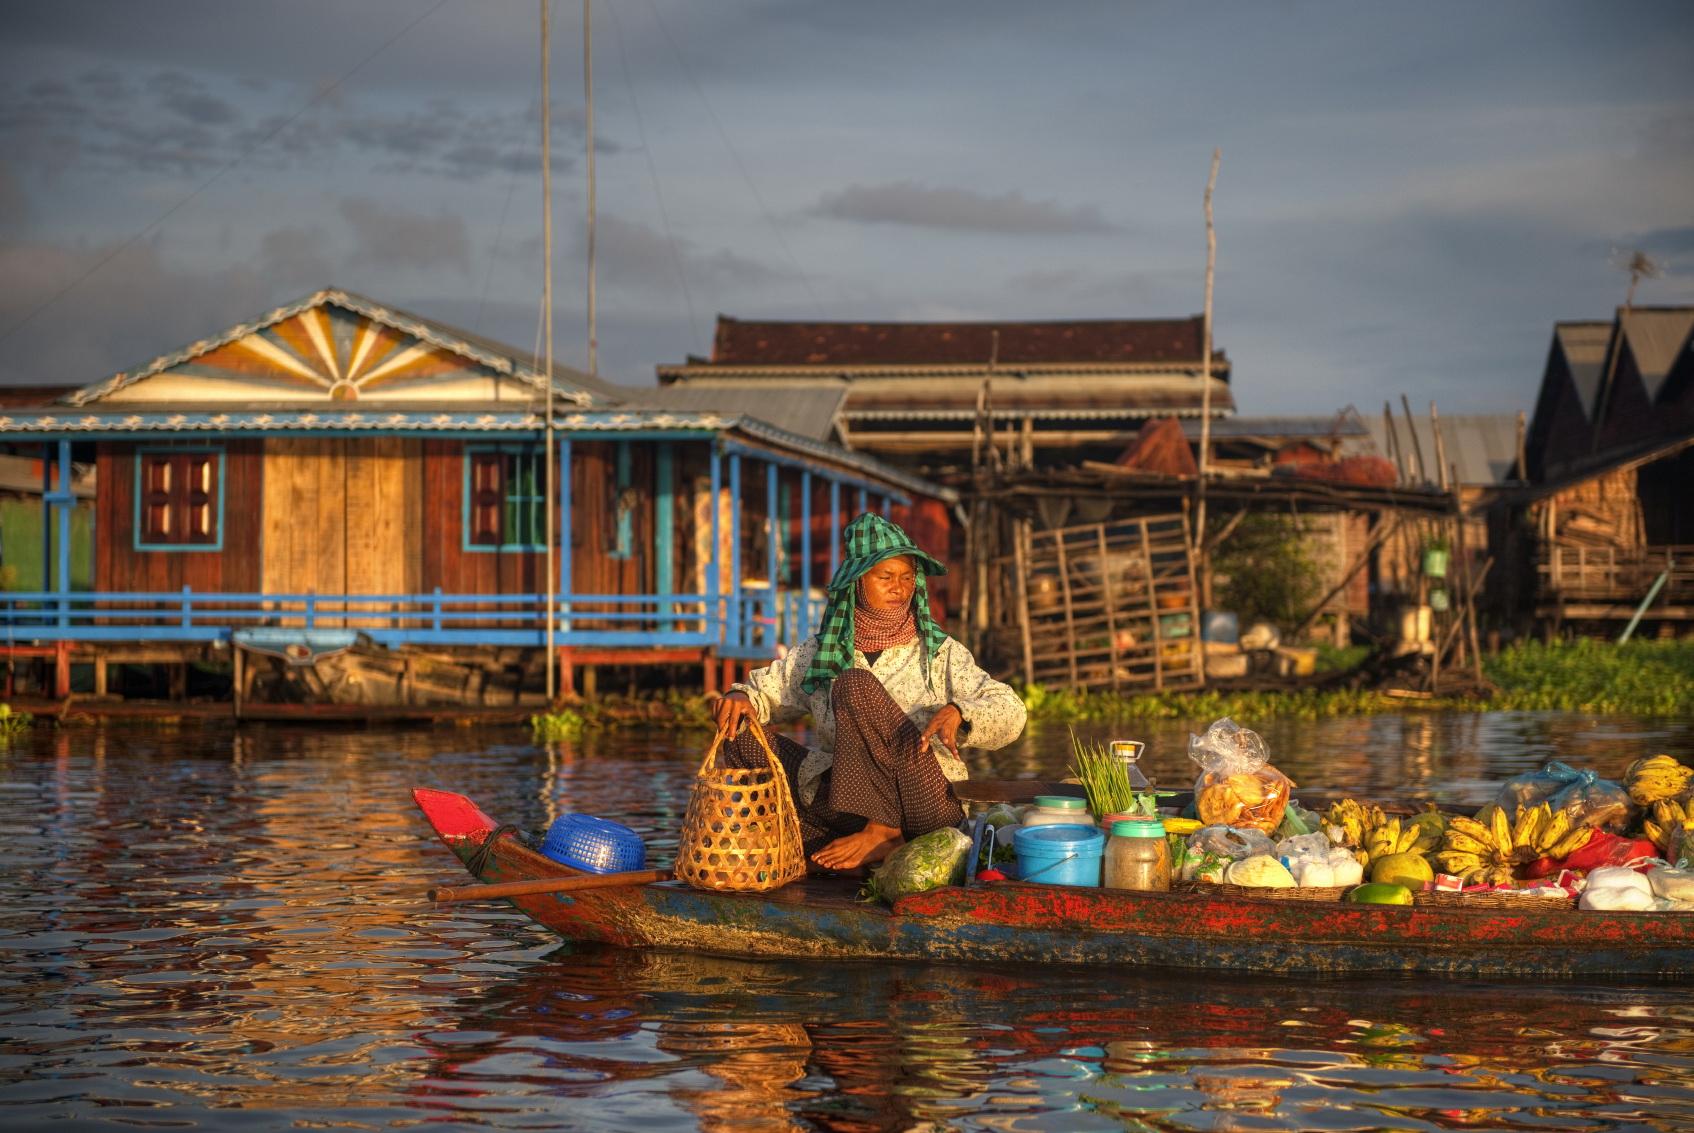 Tonle Sap is one of the biggest water basins in Southeast Asia and the country's main source of fish (photo: Asia Travel)